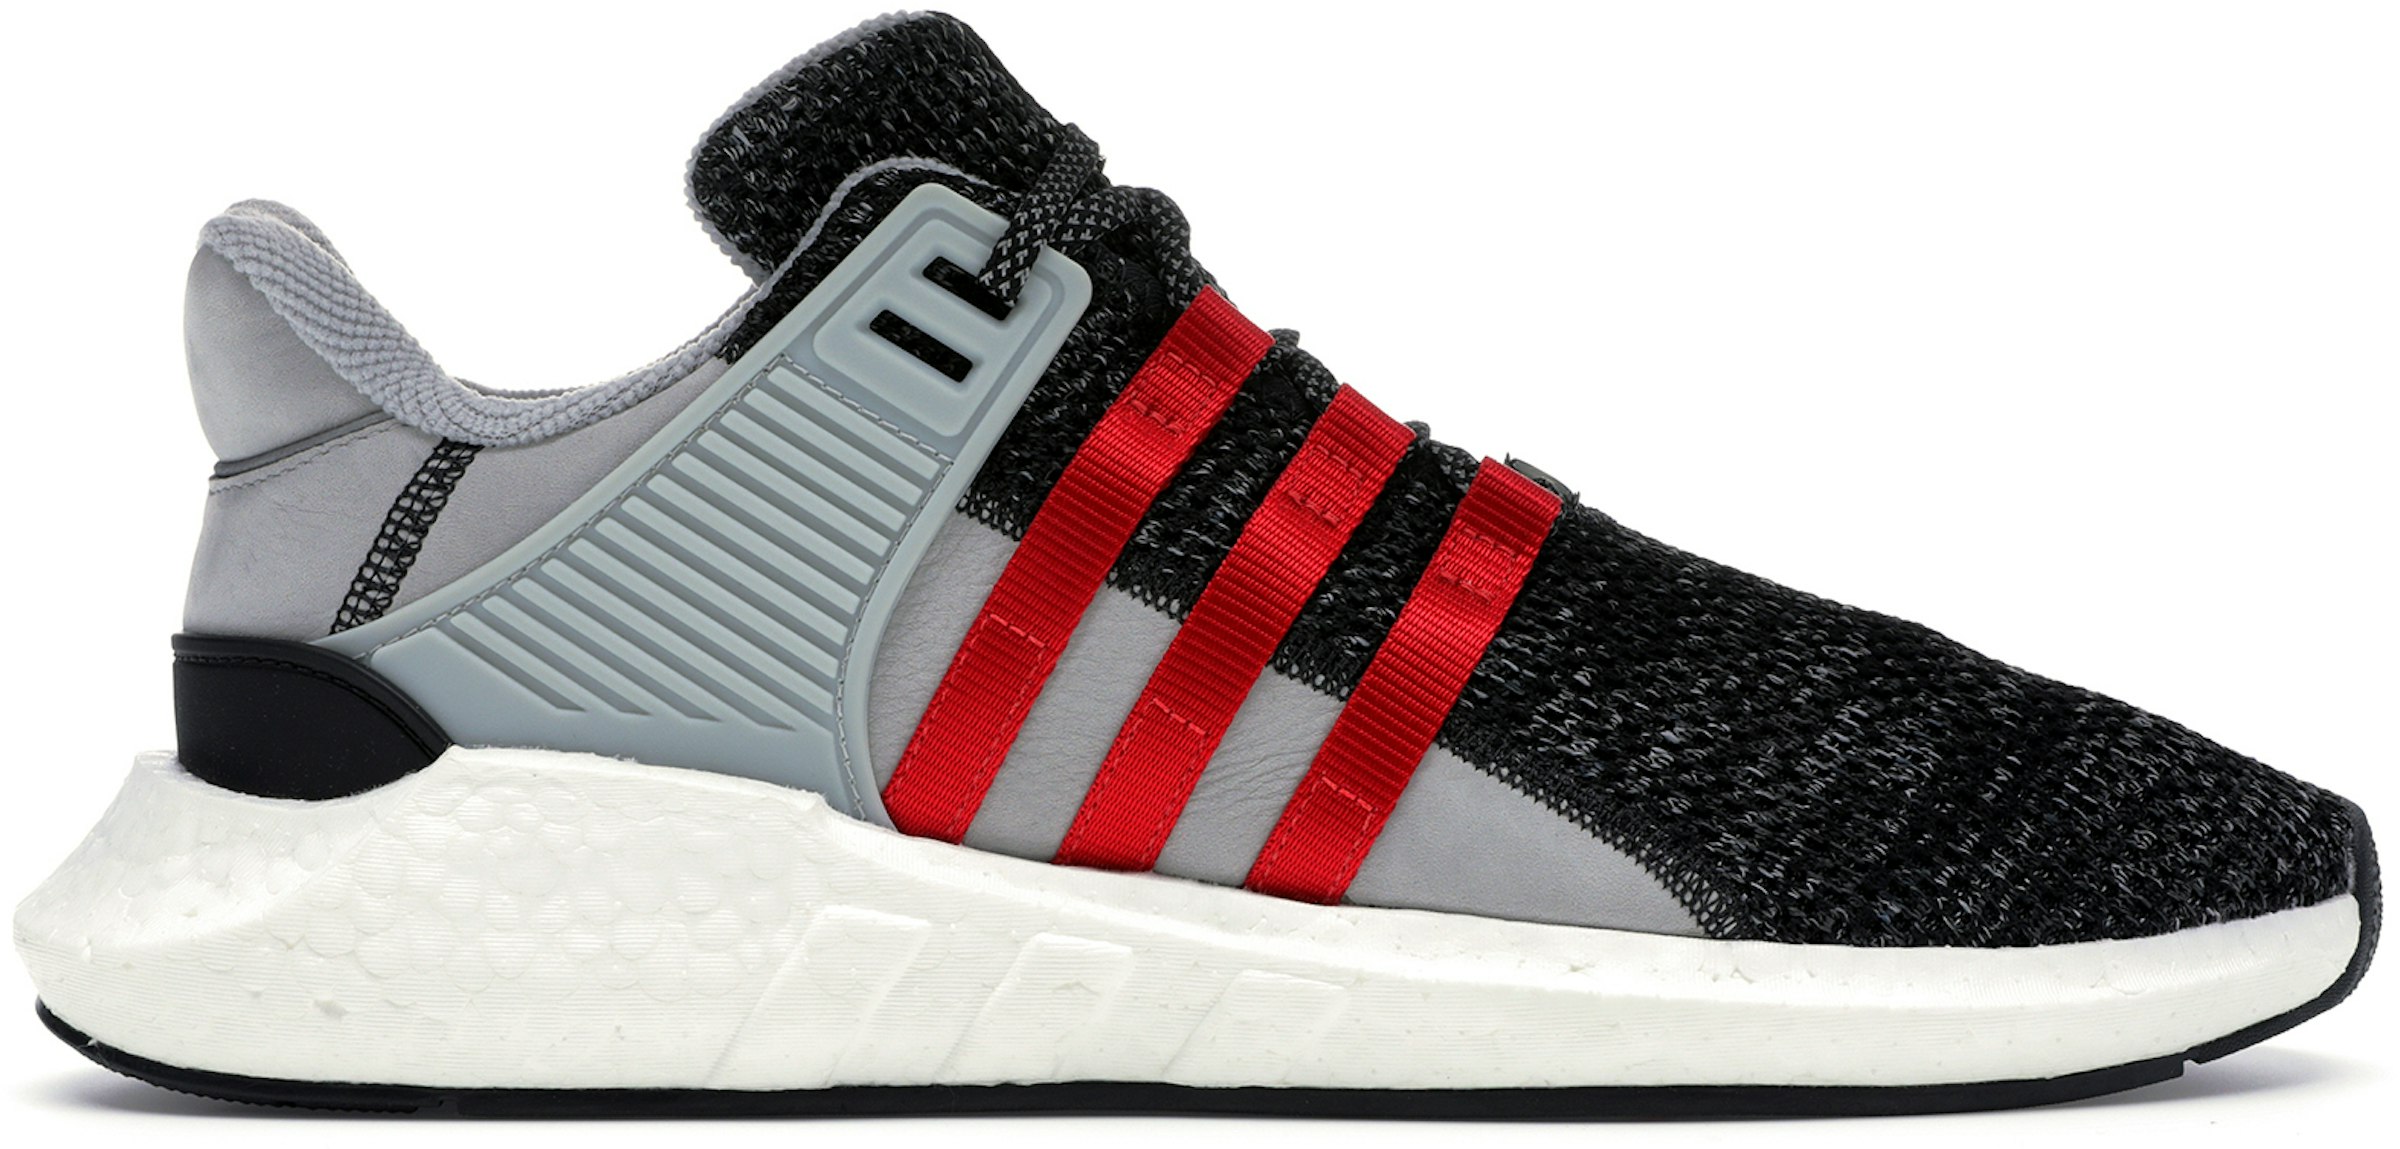 adidas EQT Support Future Overkill Coat of Arms BY2913 - US